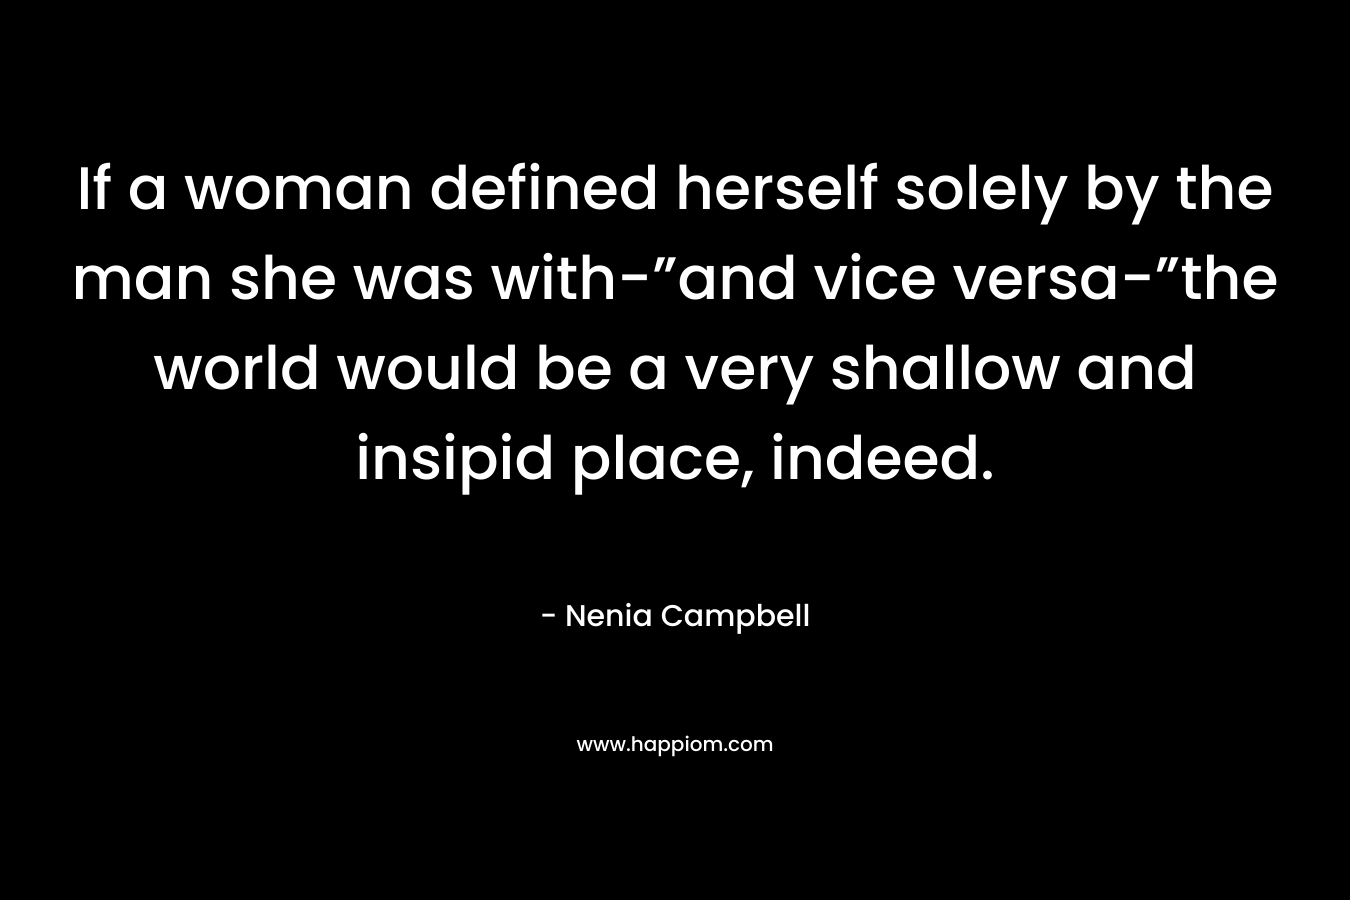 If a woman defined herself solely by the man she was with-”and vice versa-”the world would be a very shallow and insipid place, indeed. – Nenia Campbell